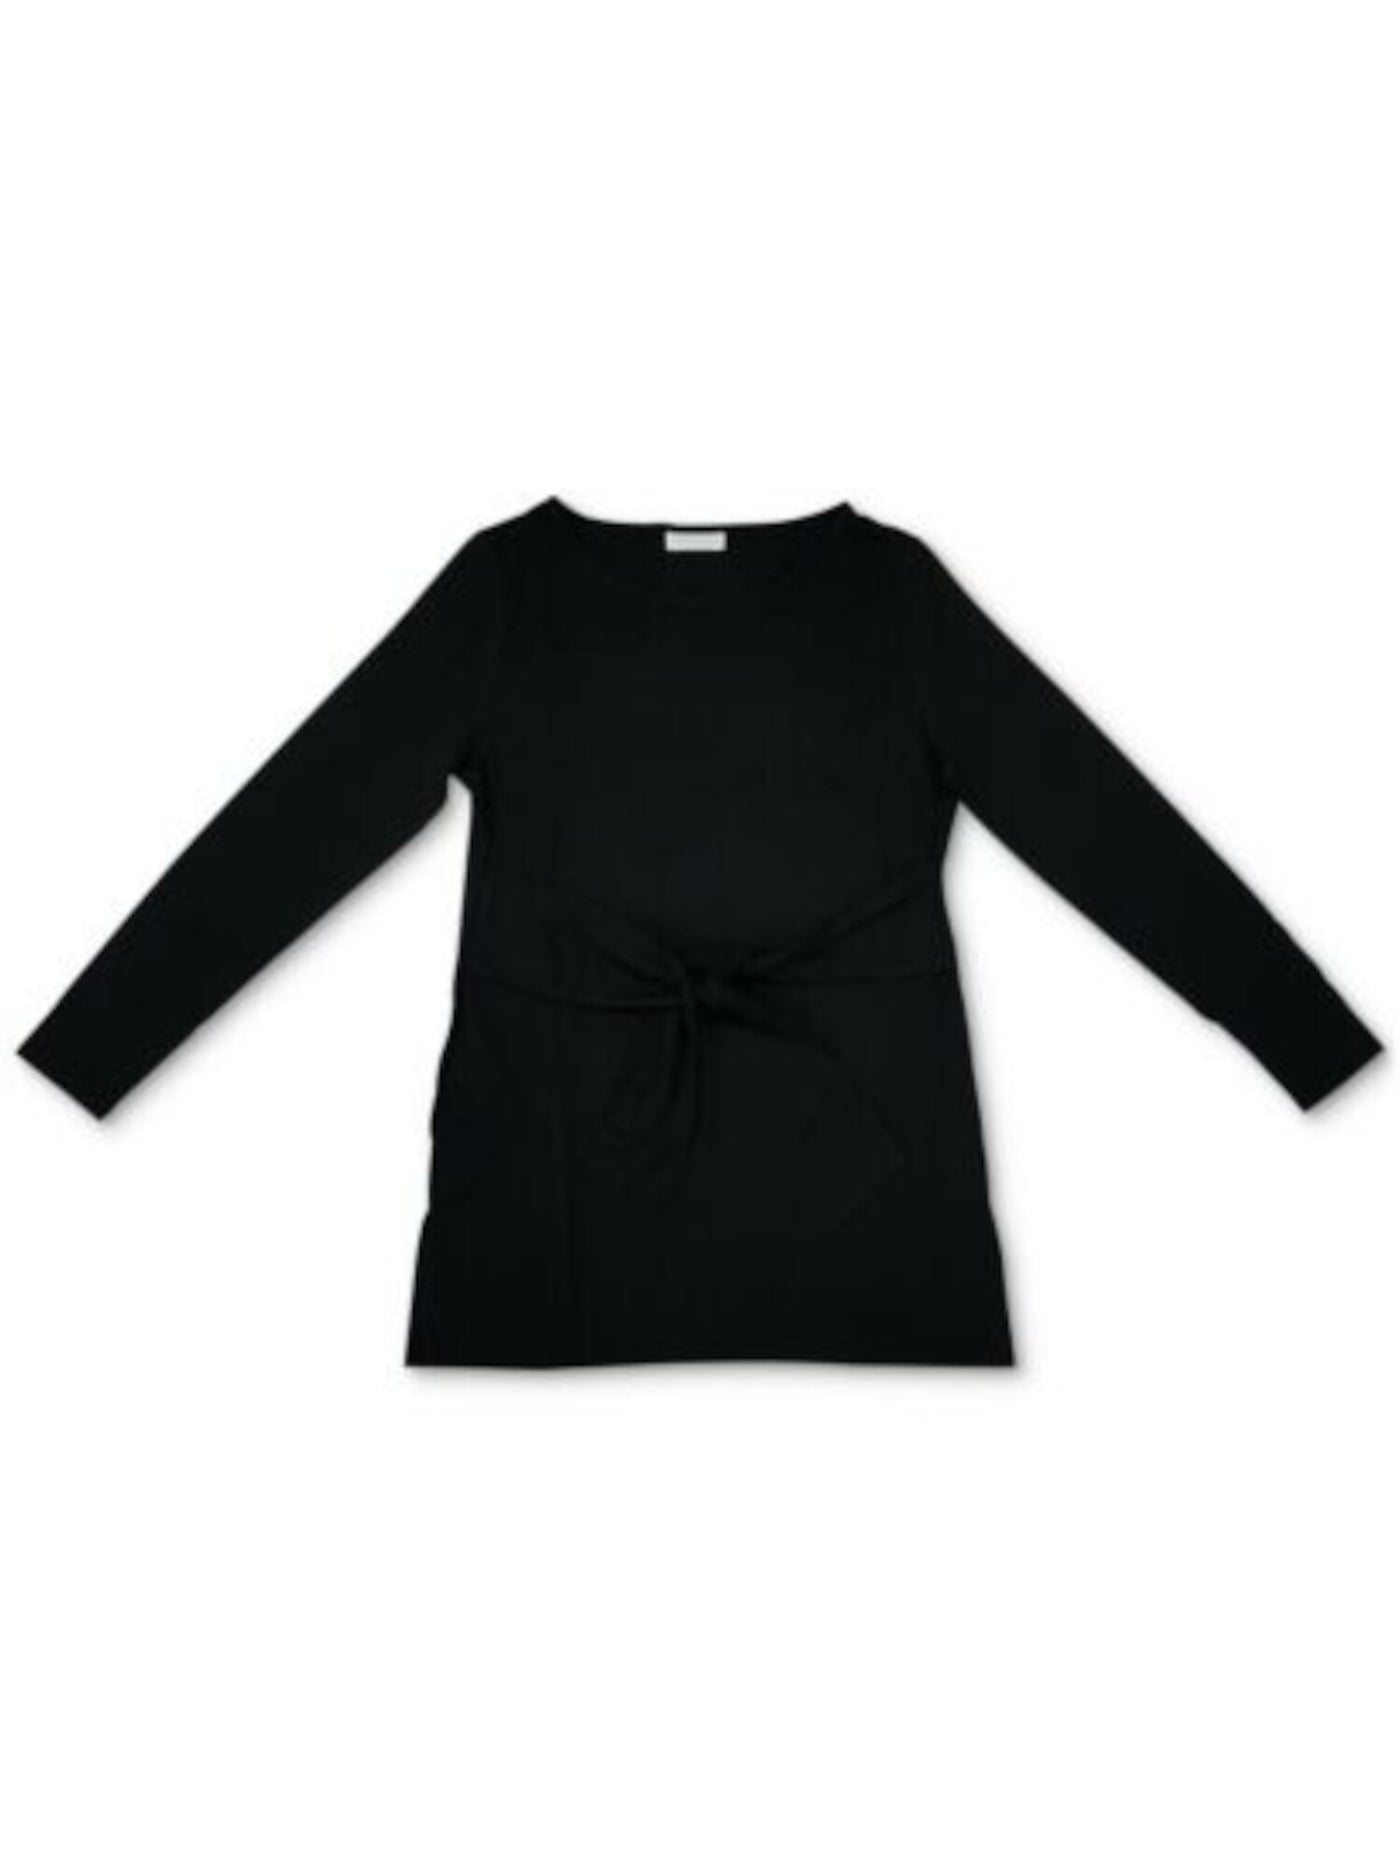 CHARTER CLUB Womens Black Stretch Long Sleeve Scoop Neck Top M